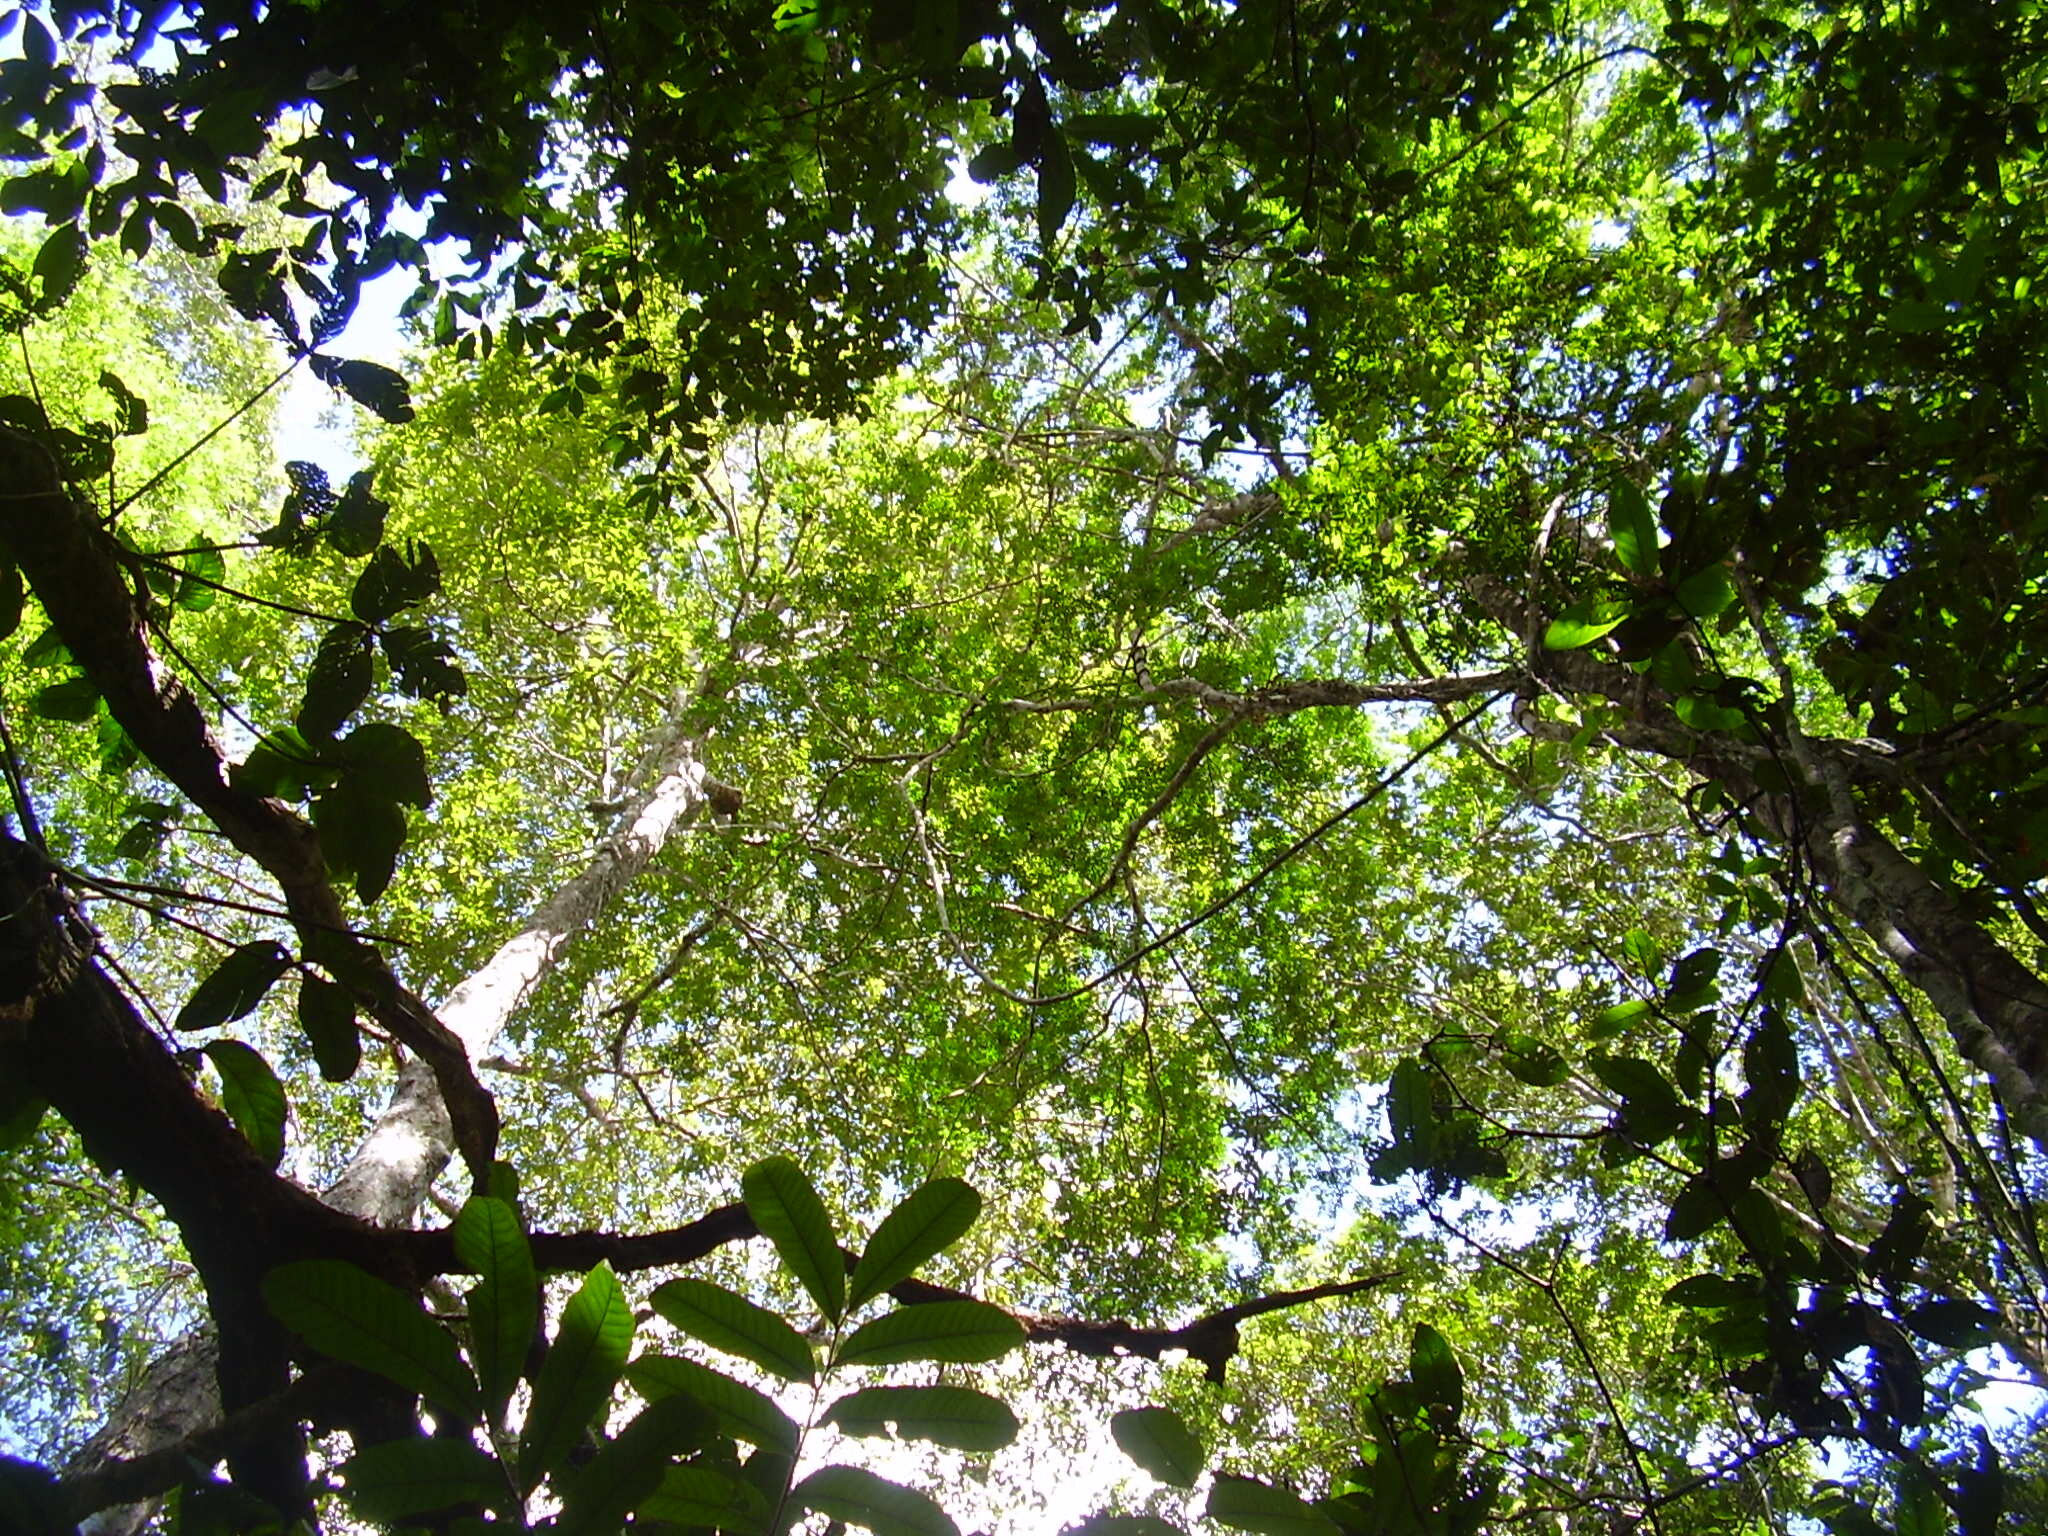 Naturally regrowing forests are helping to protect the remaining old forests in the Amazon